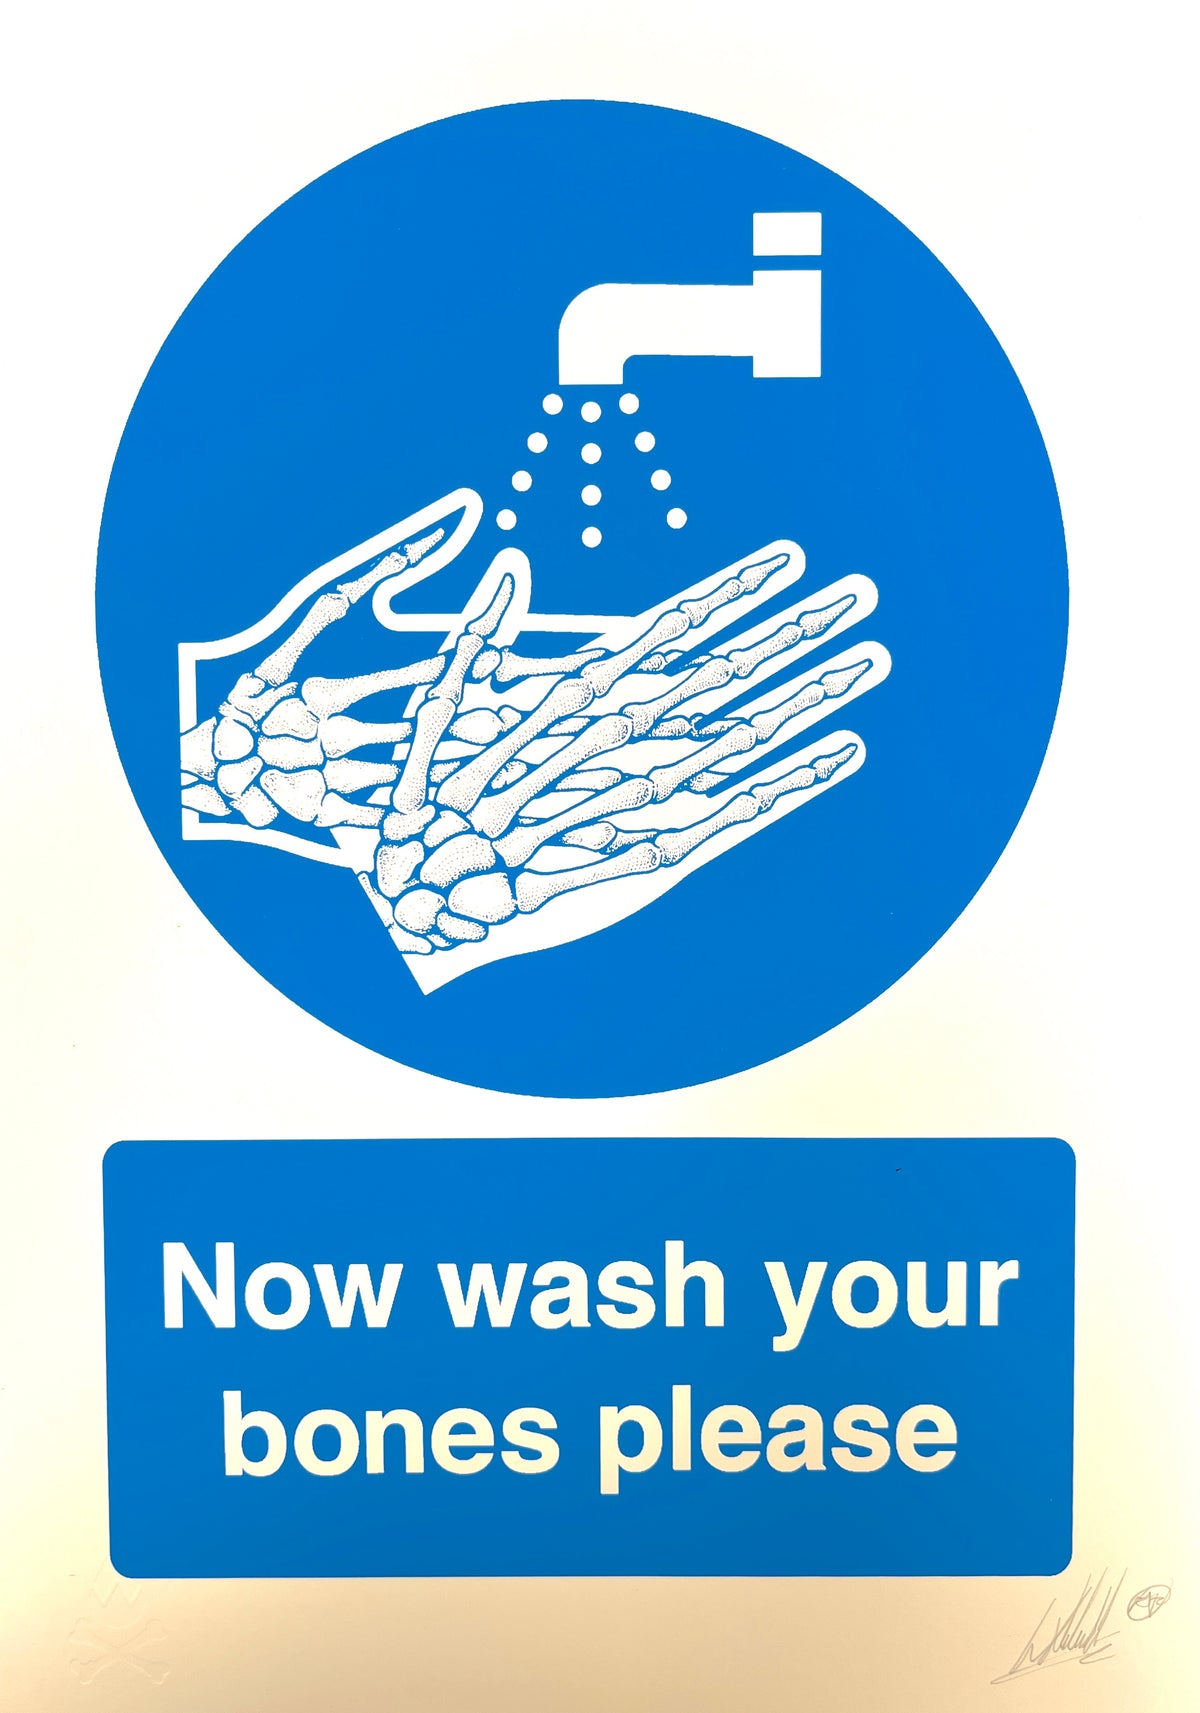 Now Wash Your Bones by Will Blood